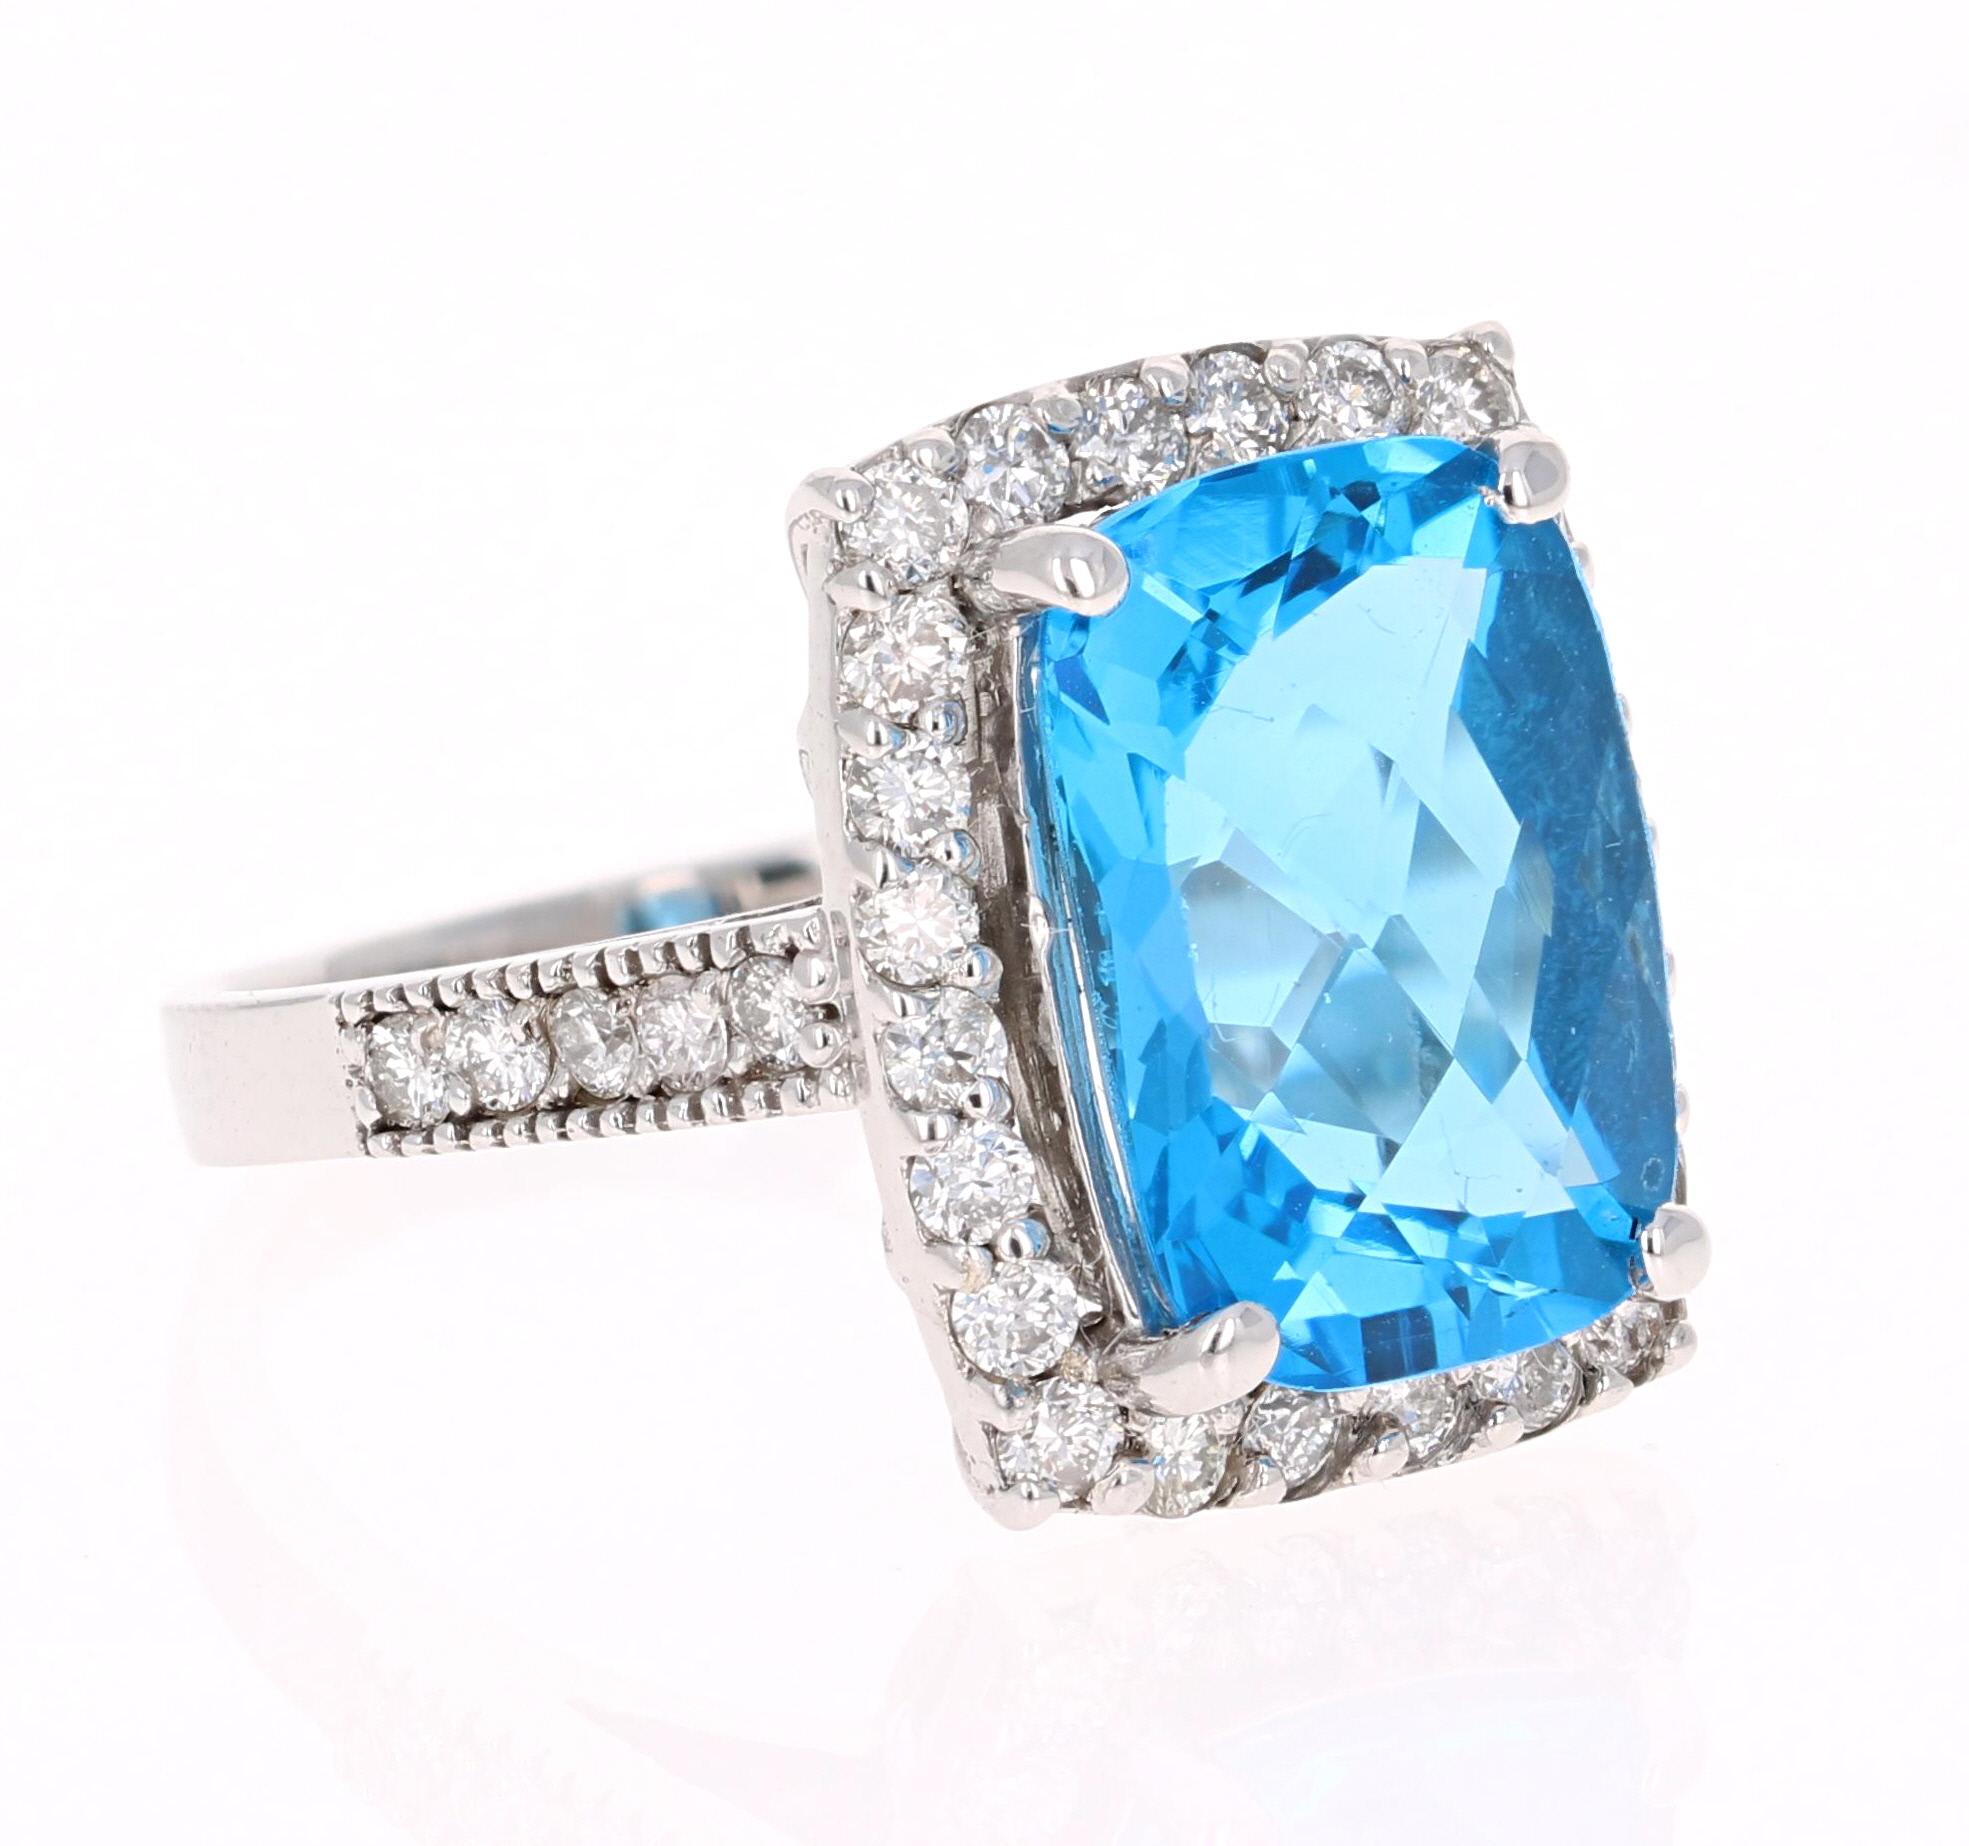 This beautiful Radiant-Cushion Cut Blue Topaz and Diamond ring has a stunningly large Blue Topaz that weighs 7.62 Carats. It is surrounded by 34 Round Cut Diamonds that weigh 0.87 Carats. The total carat weight of the ring is 8.49 Carats. 
The